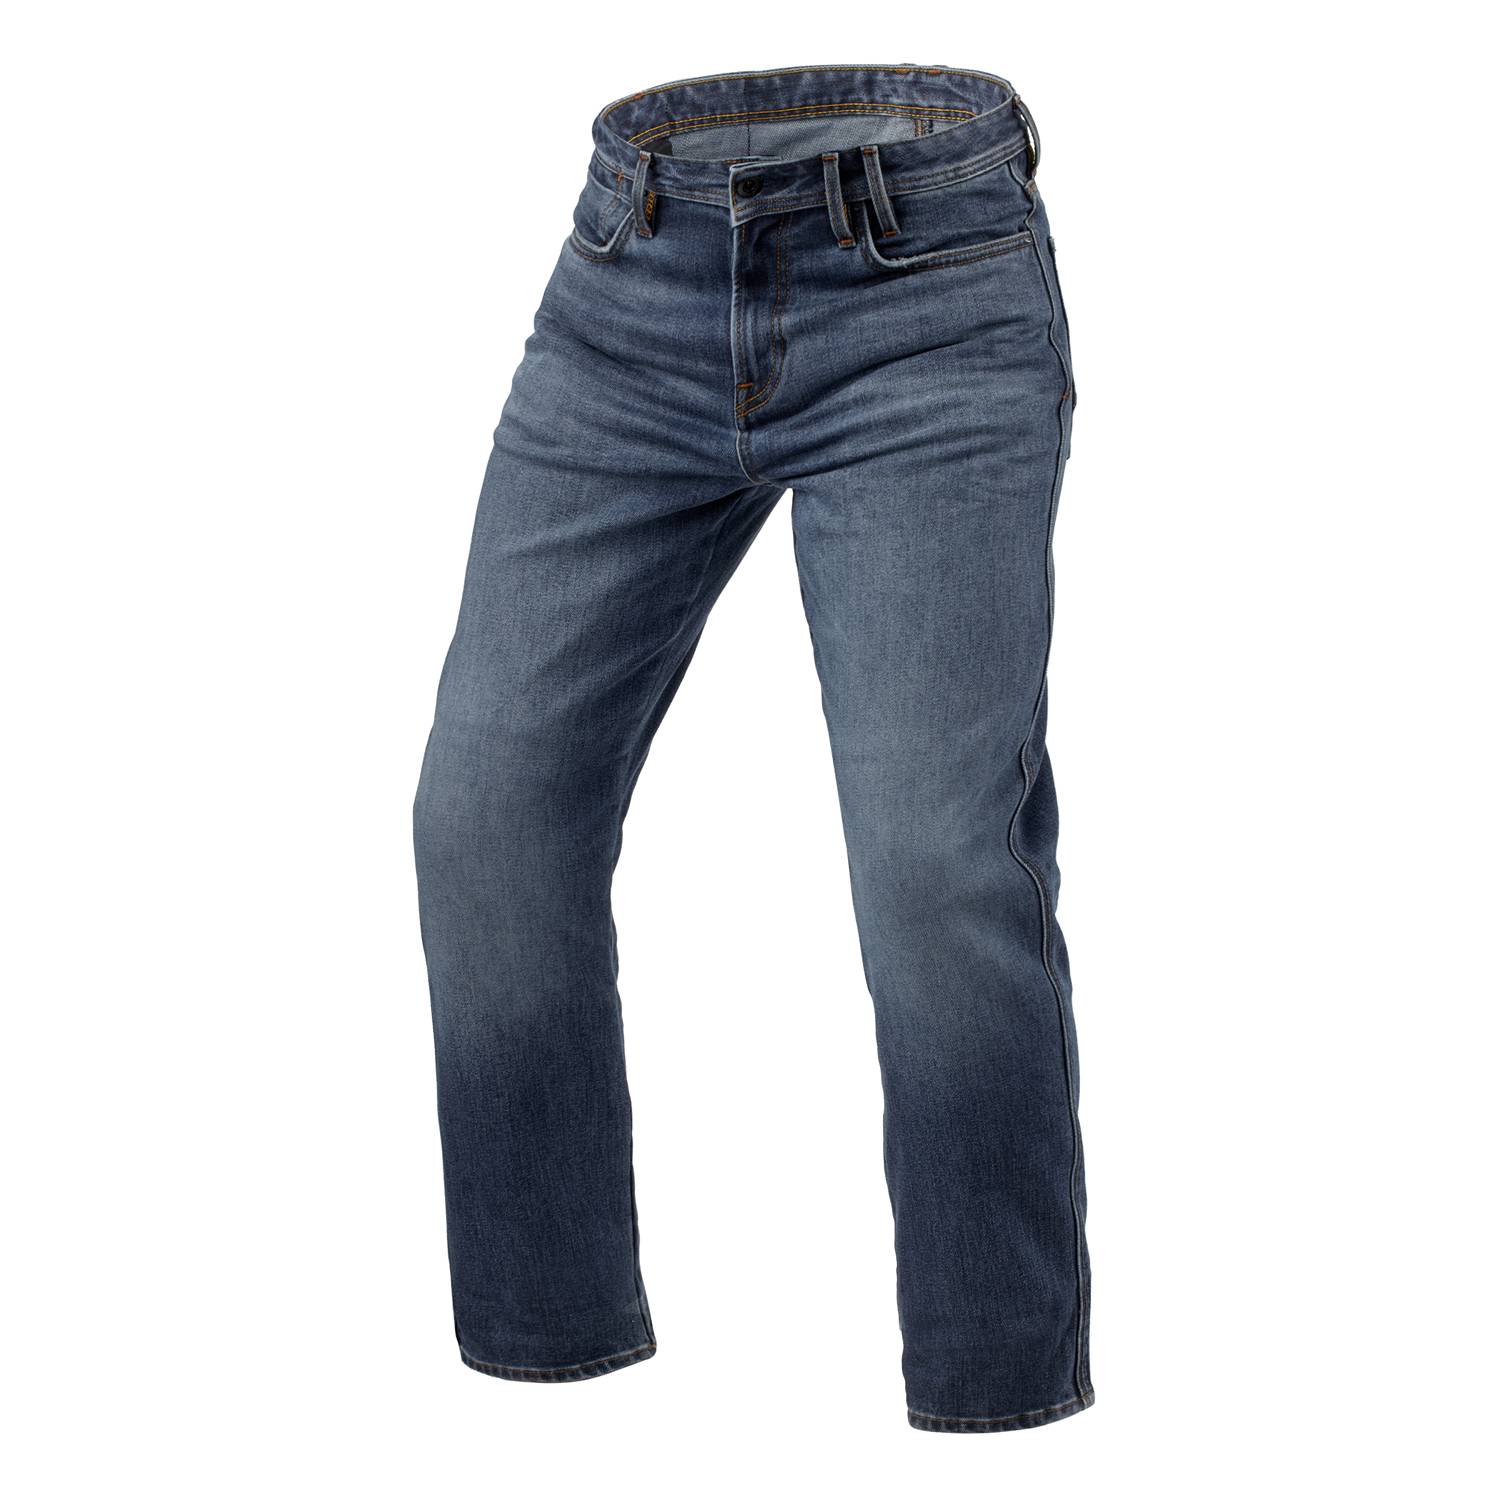 Image of REV'IT! Jeans Lombard 3 RF Medium Blue Stone L36 Motorcycle Jeans Size L36/W33 ID 8700001376112